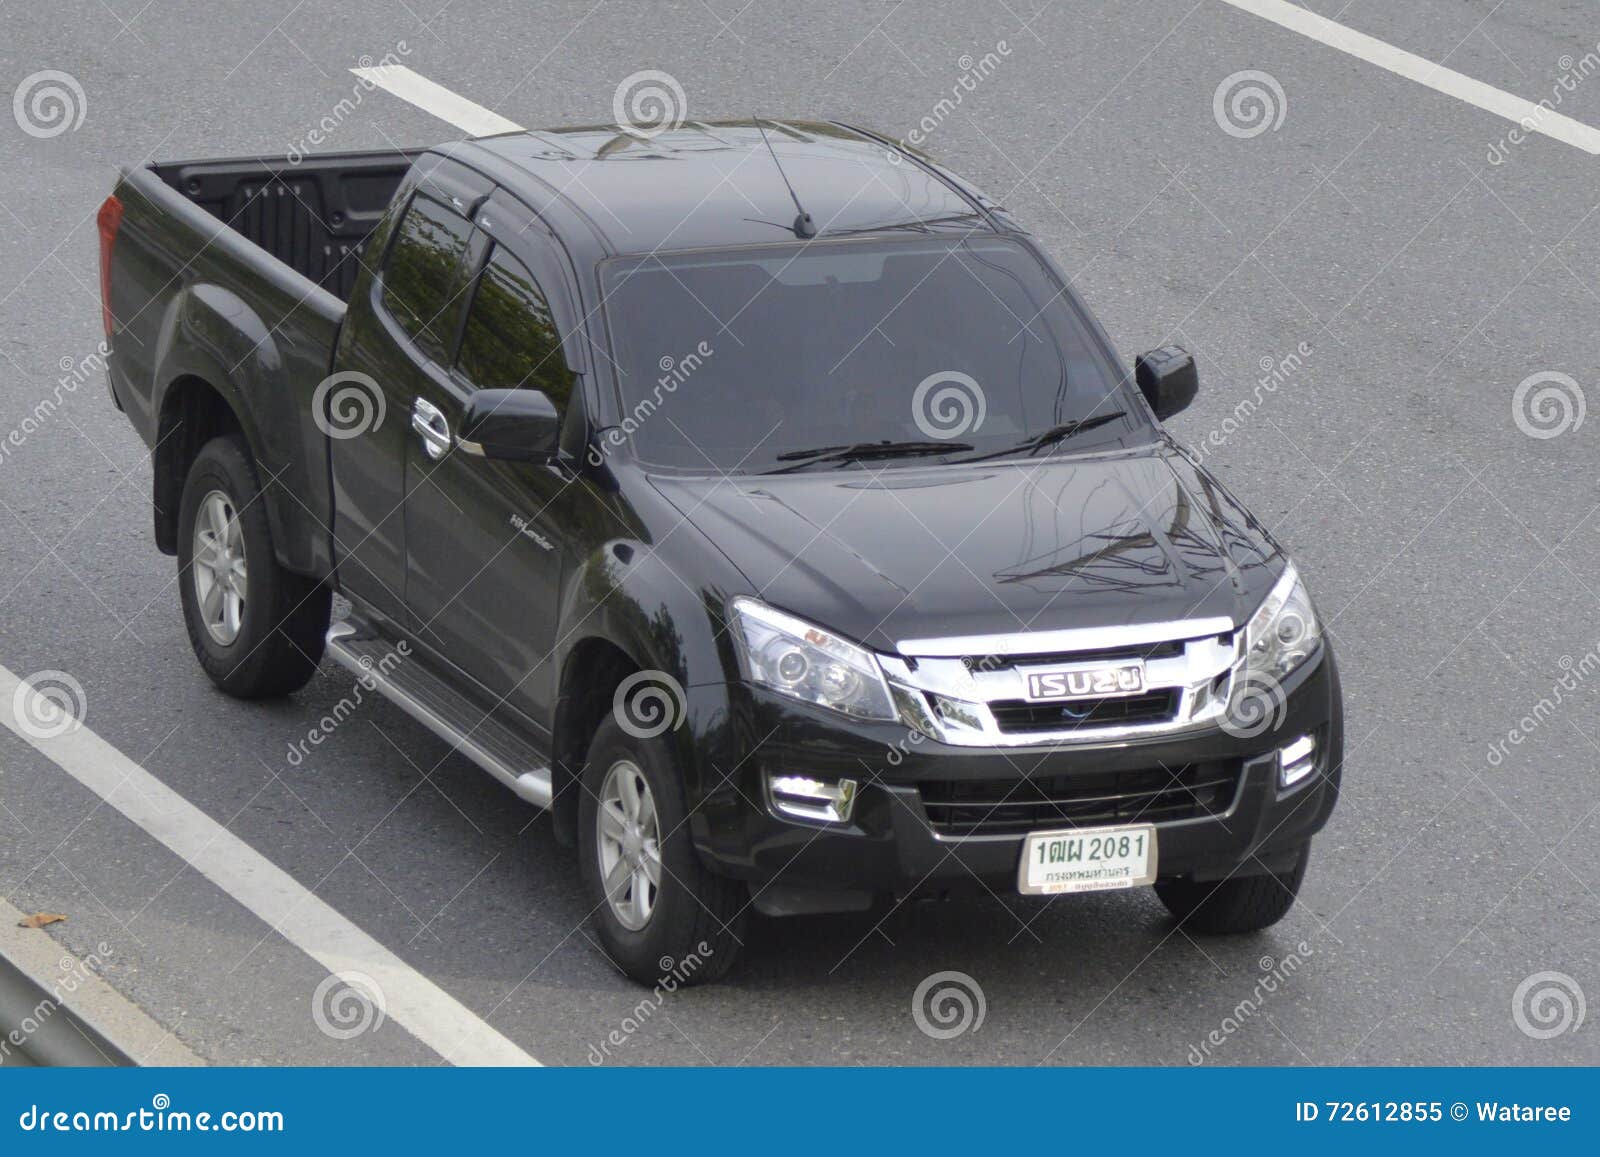 Download 2 403 Isuzu Truck Photos Free Royalty Free Stock Photos From Dreamstime PSD Mockup Templates